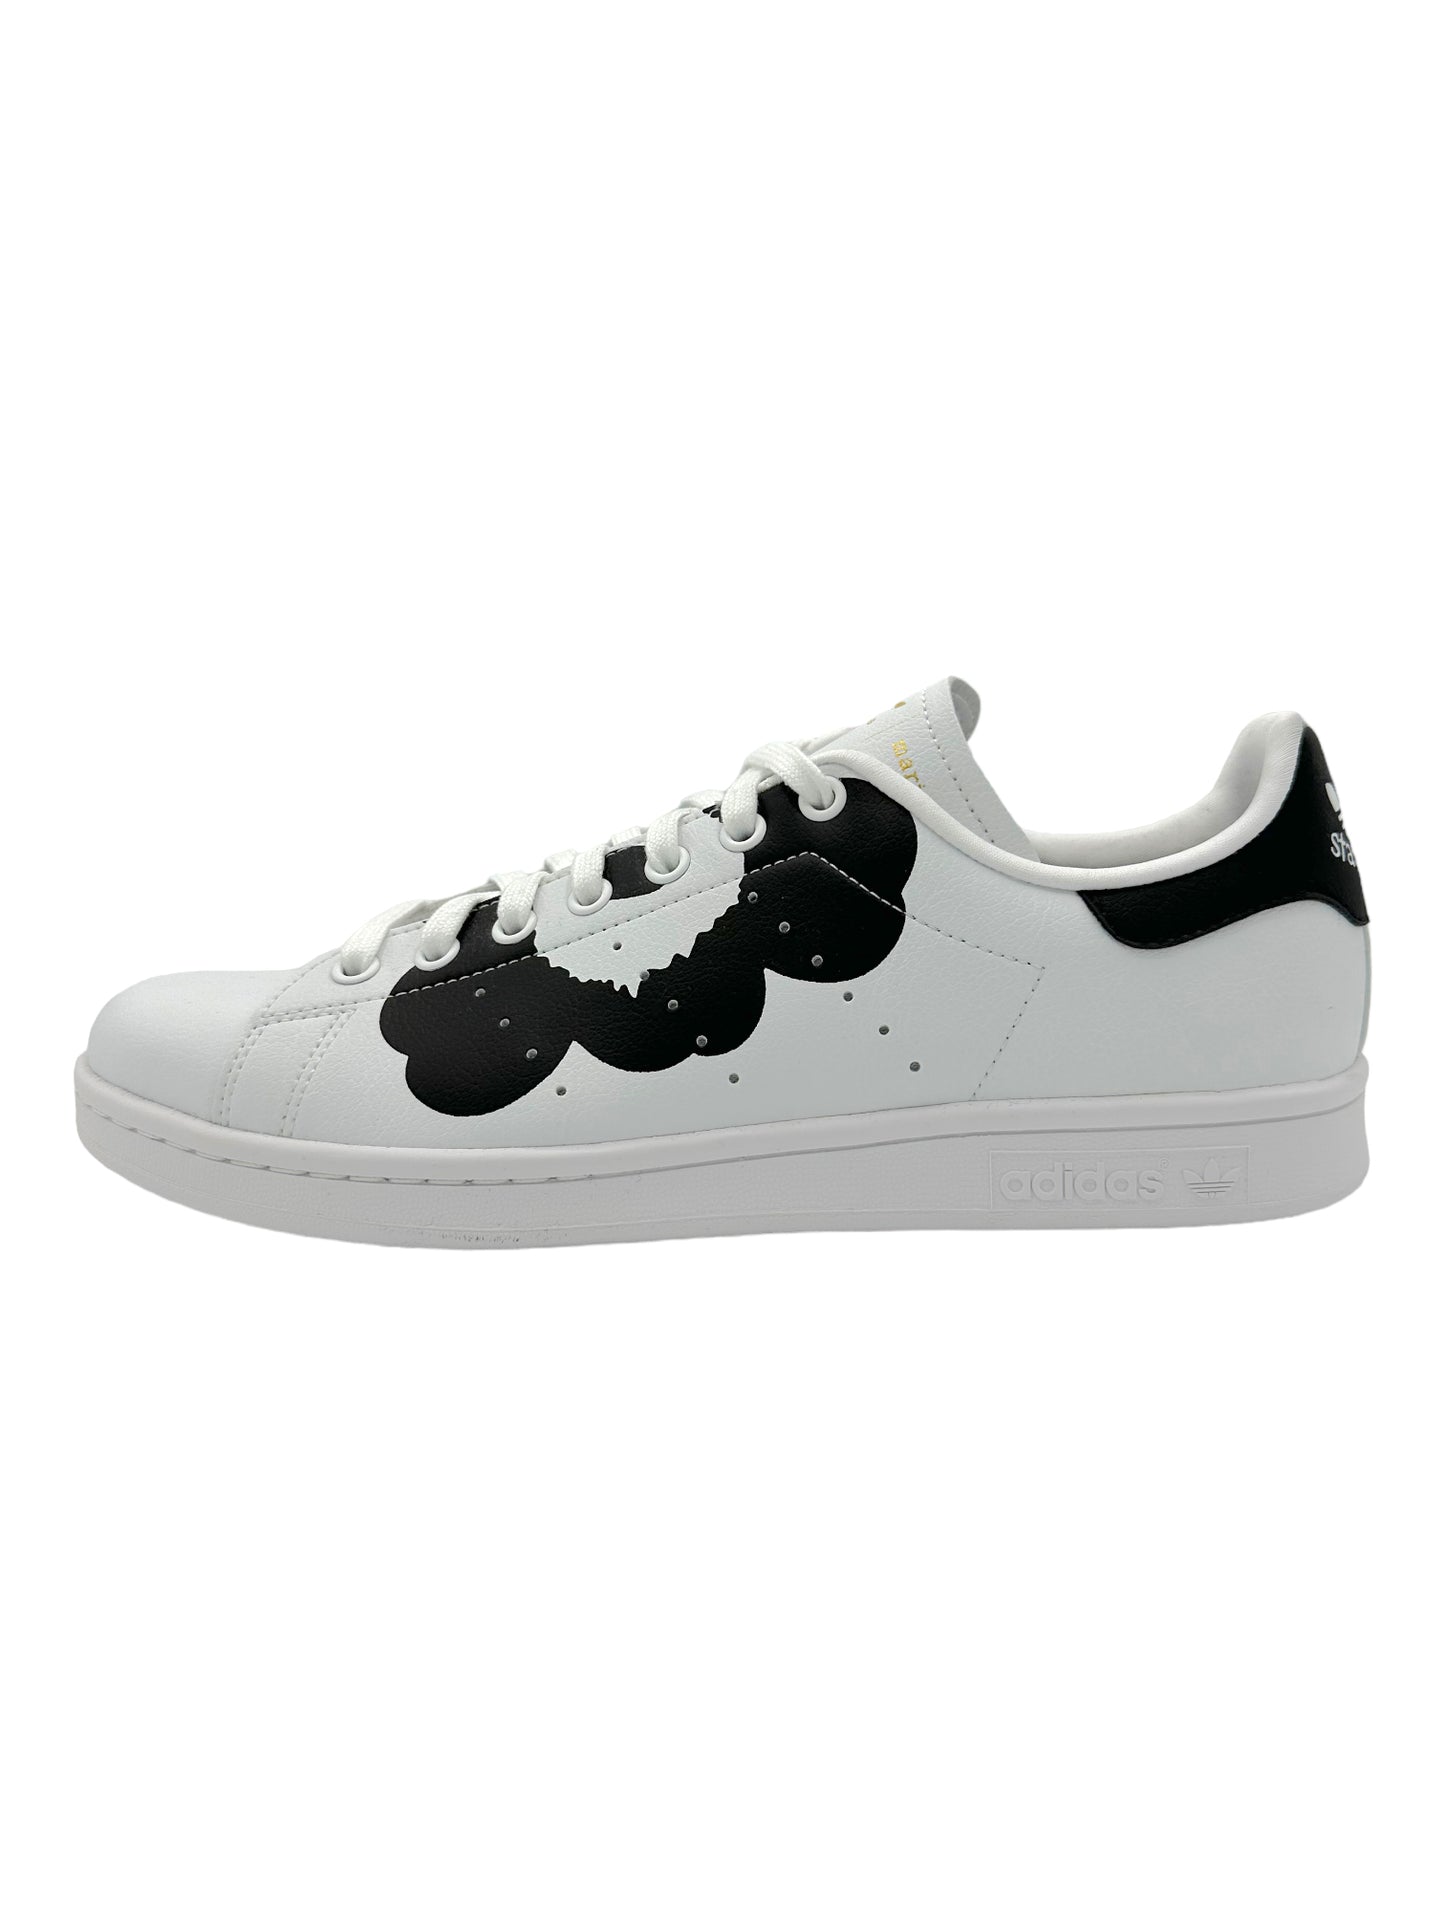 Adidas White Stan Smith Marimekko Unikko Sneakers - Genuine Design Luxury Consignment for Men. New & Pre-Owned Clothing, Shoes, & Accessories. Calgary, Canada